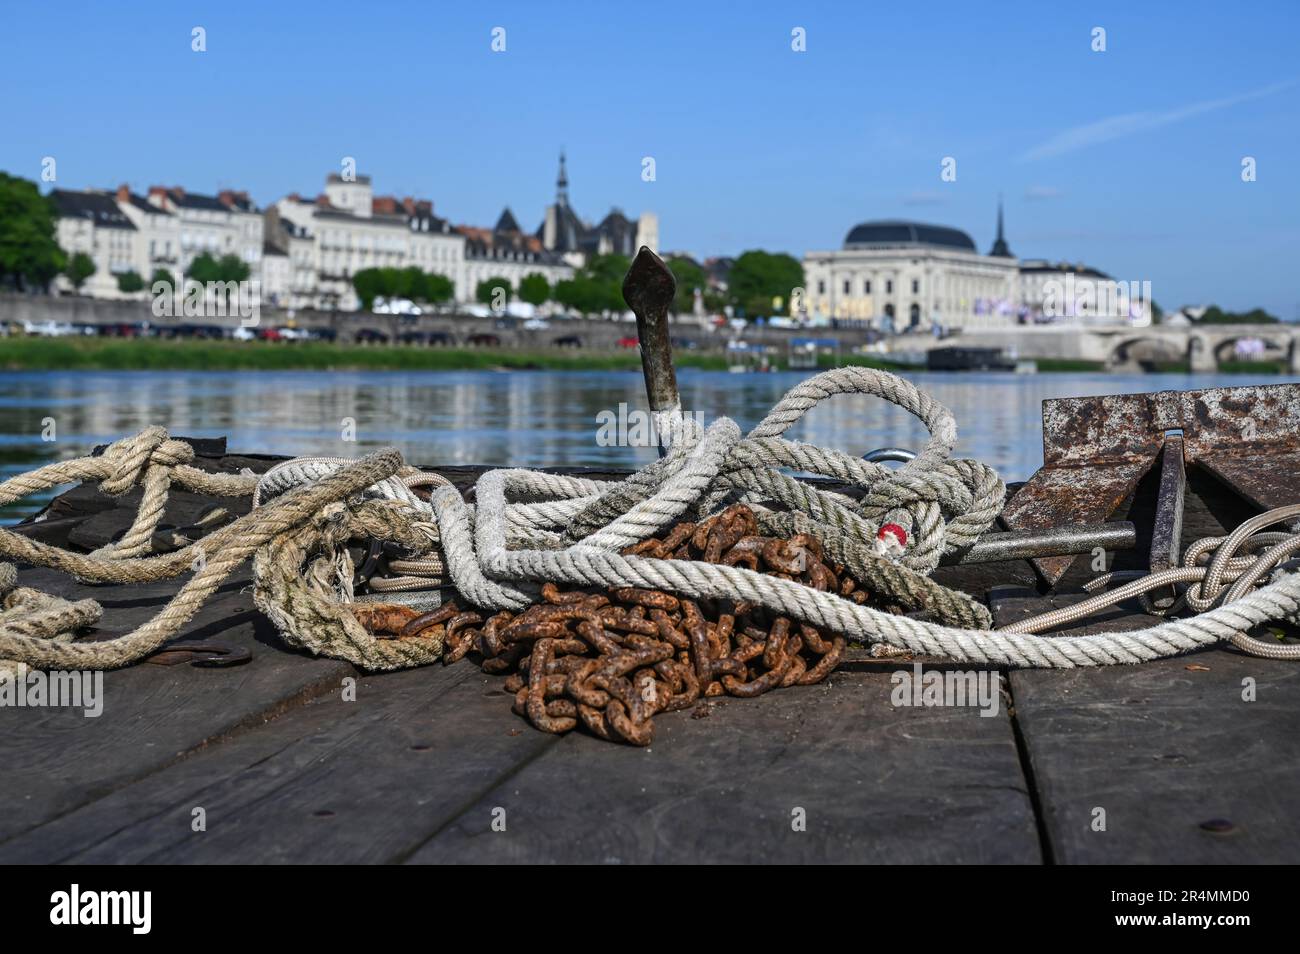 View of Saumur from a Loire river boat with the town hall and town theatre bordering the waterfront, France Stock Photo